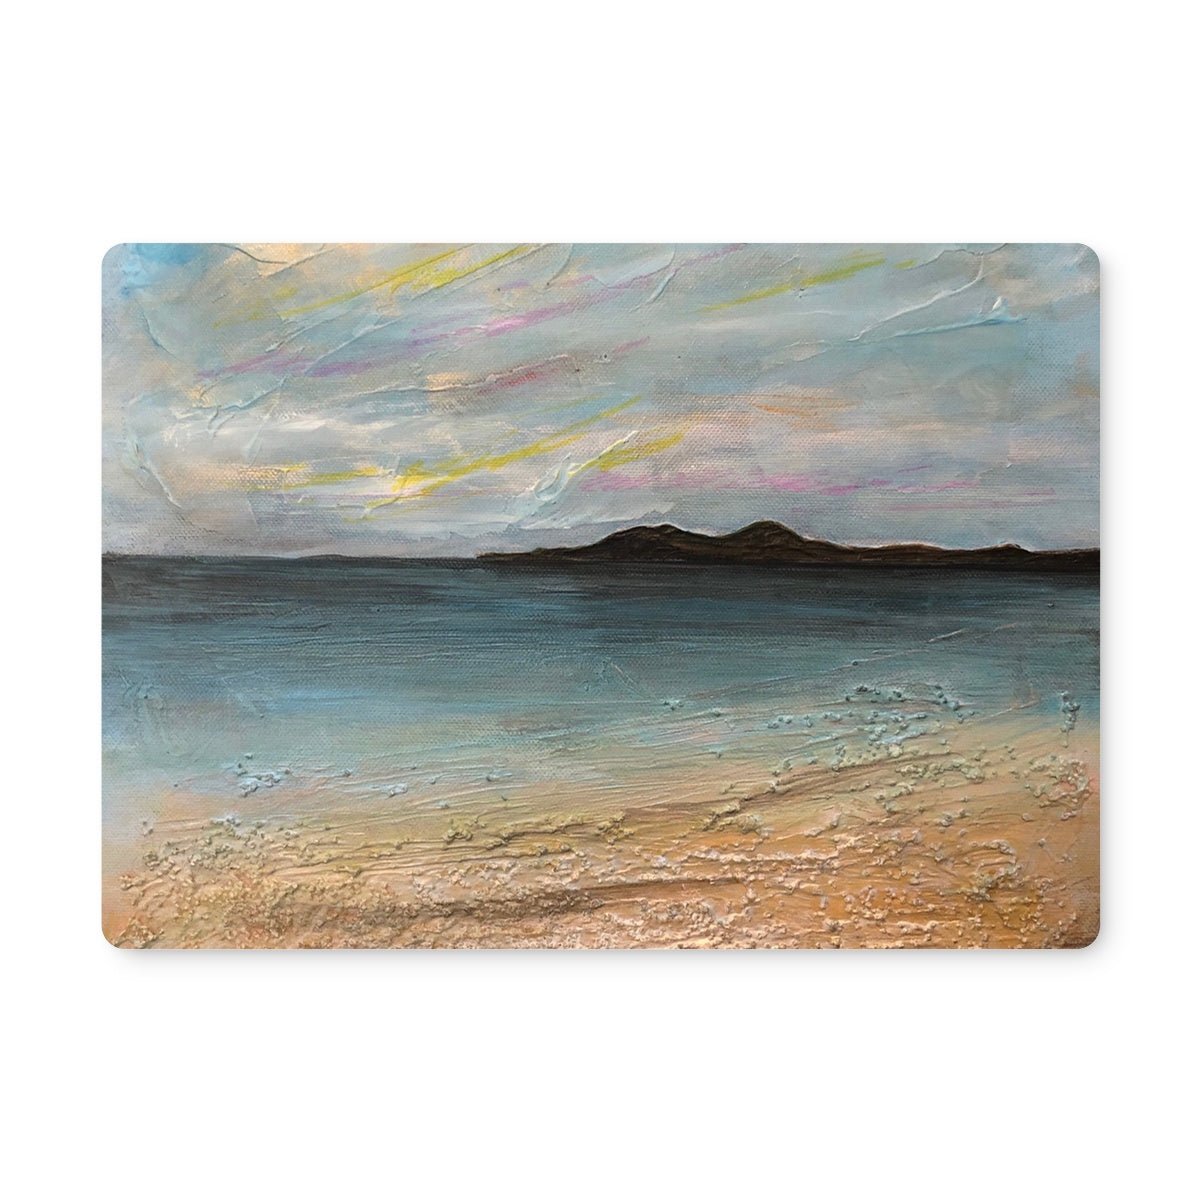 Garrynamonie Beach South Uist Art Gifts Placemat-Placemats-Hebridean Islands Art Gallery-4 Placemats-Paintings, Prints, Homeware, Art Gifts From Scotland By Scottish Artist Kevin Hunter